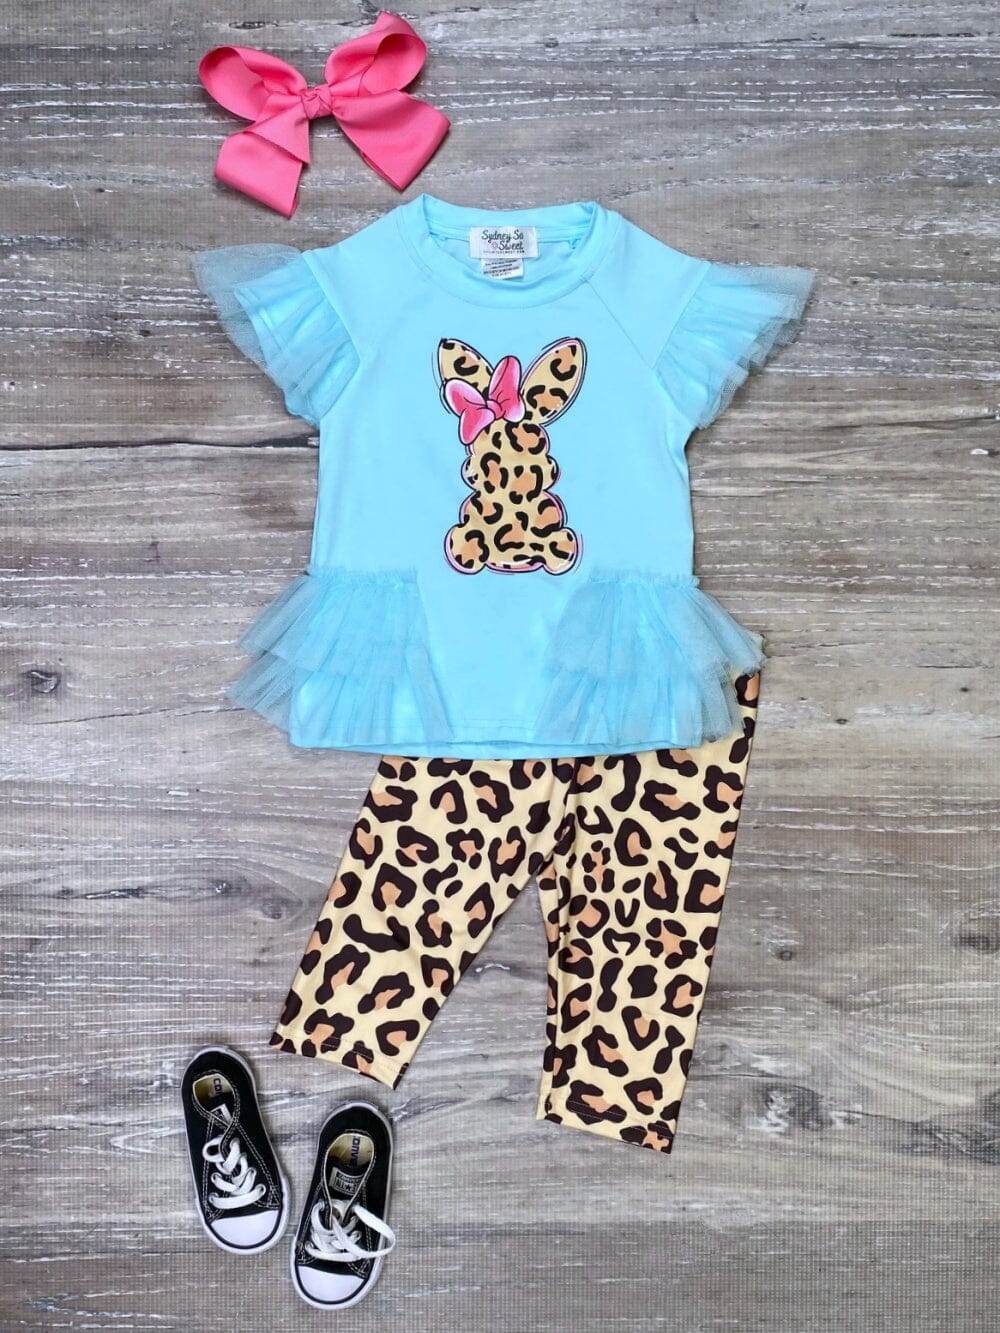 Wild About Bunnies Blue Cheetah Tulle Chiffon Girls Easter Capri Outfit - Sydney So Sweet